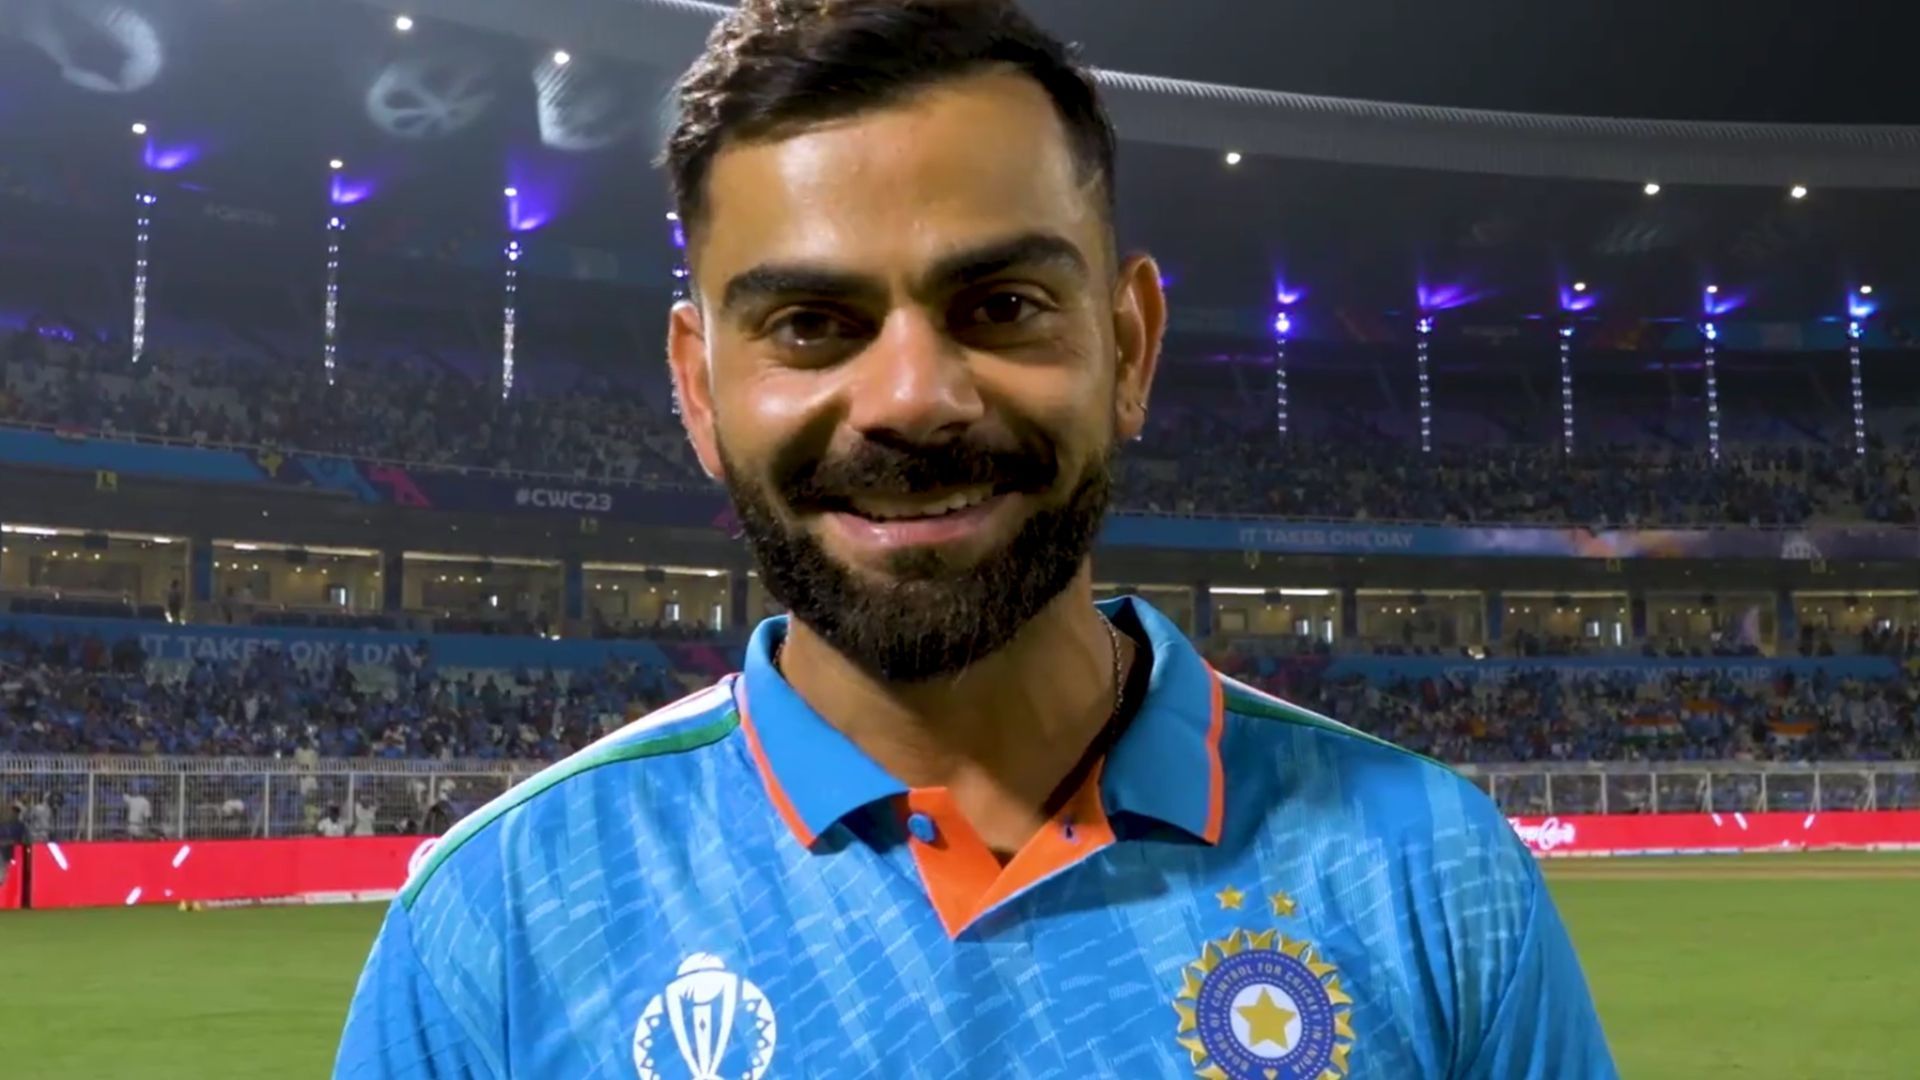 Virat Kohli was happy that he could help the team win on his birthday (P.C.:BCCI)